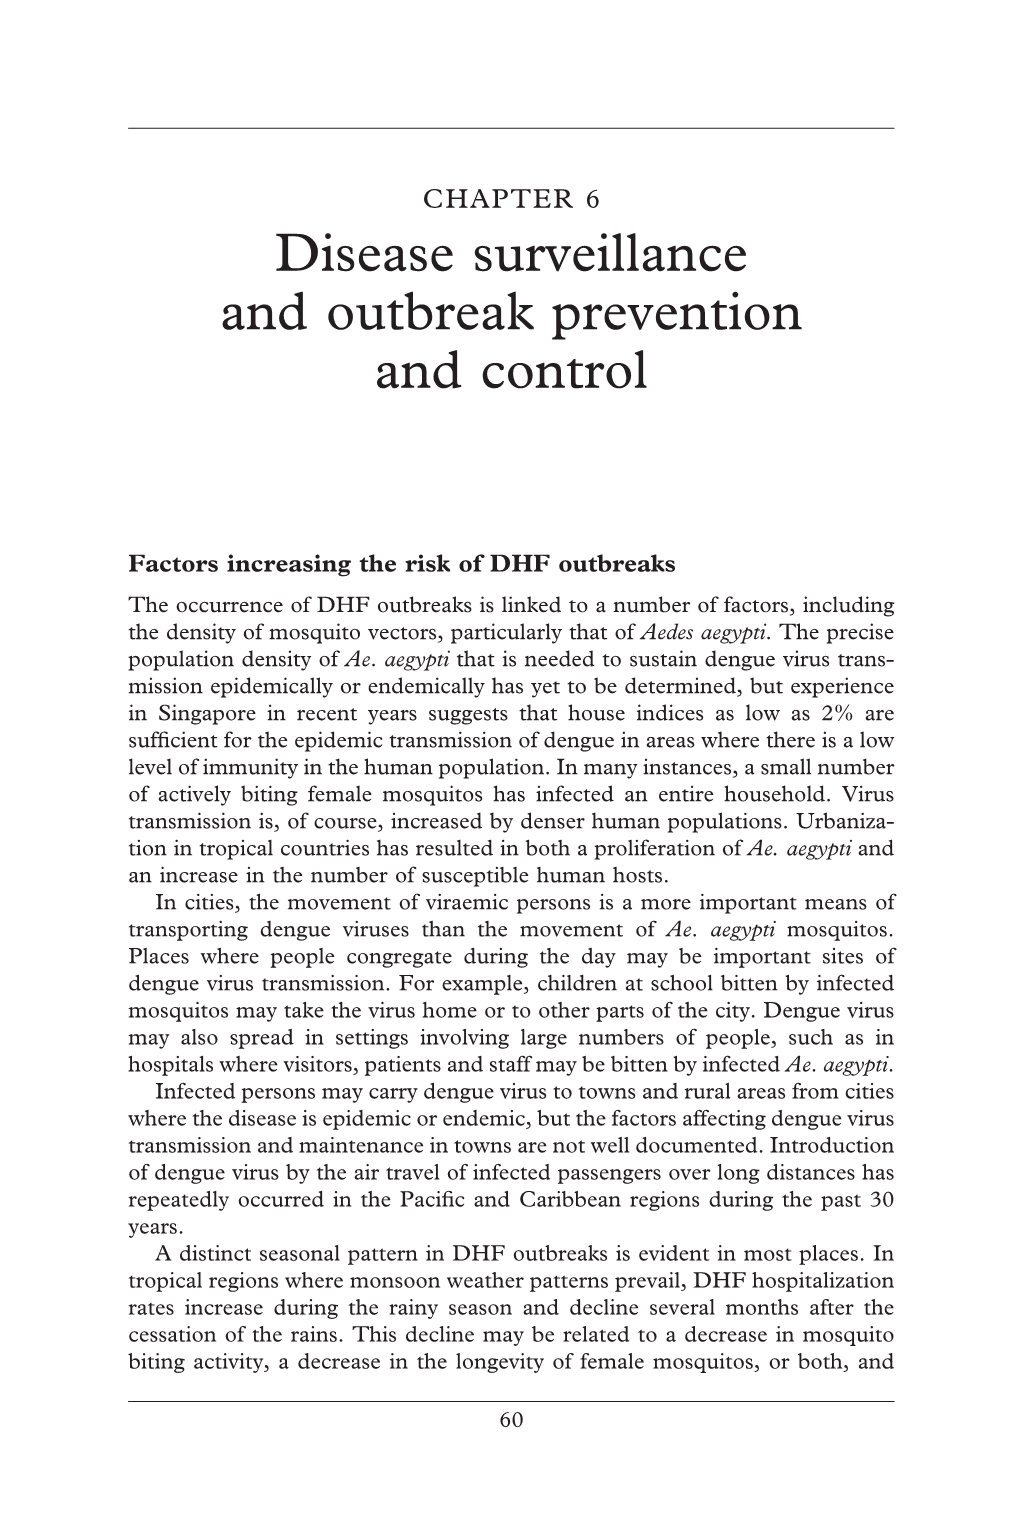 Disease Surveillance and Outbreak Prevention and Control